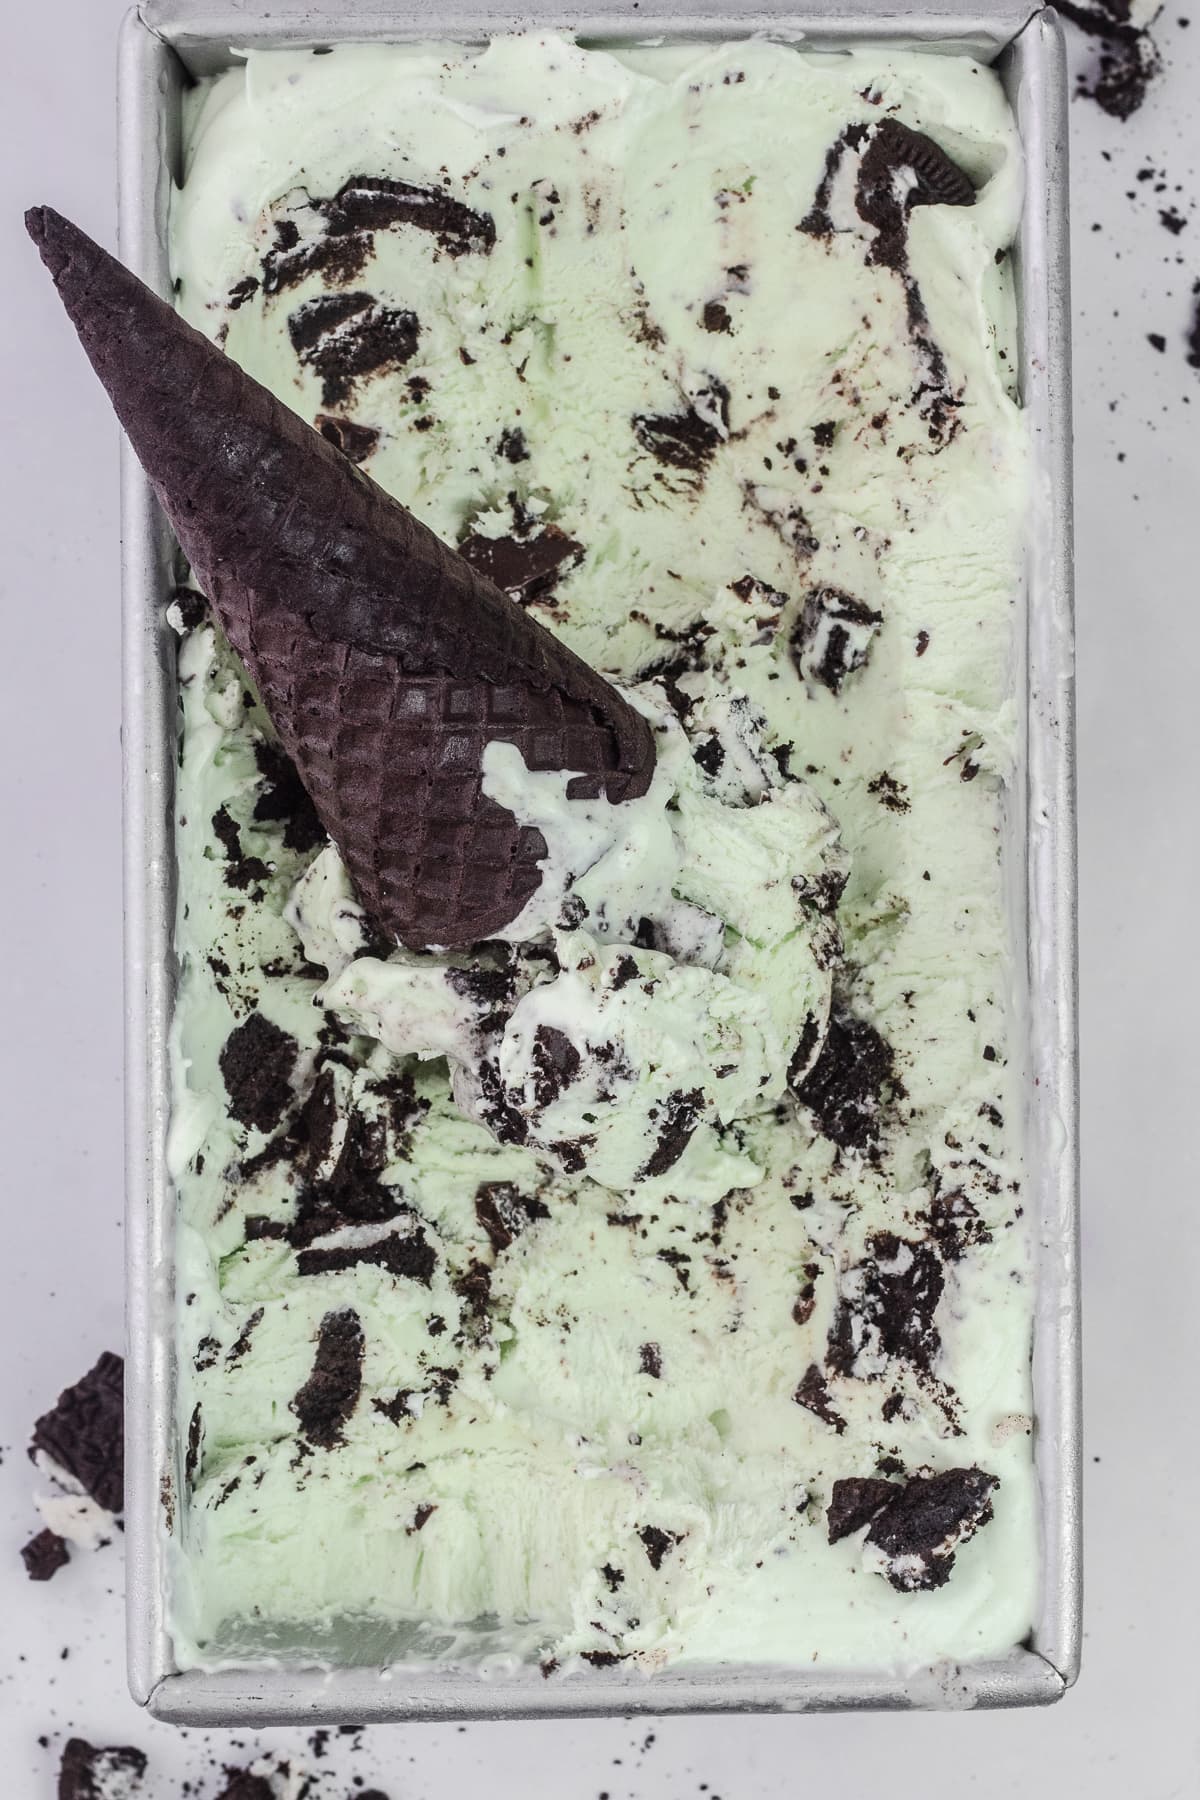 Container of Mint Oreo Ice Cream with chocolate sugar cone